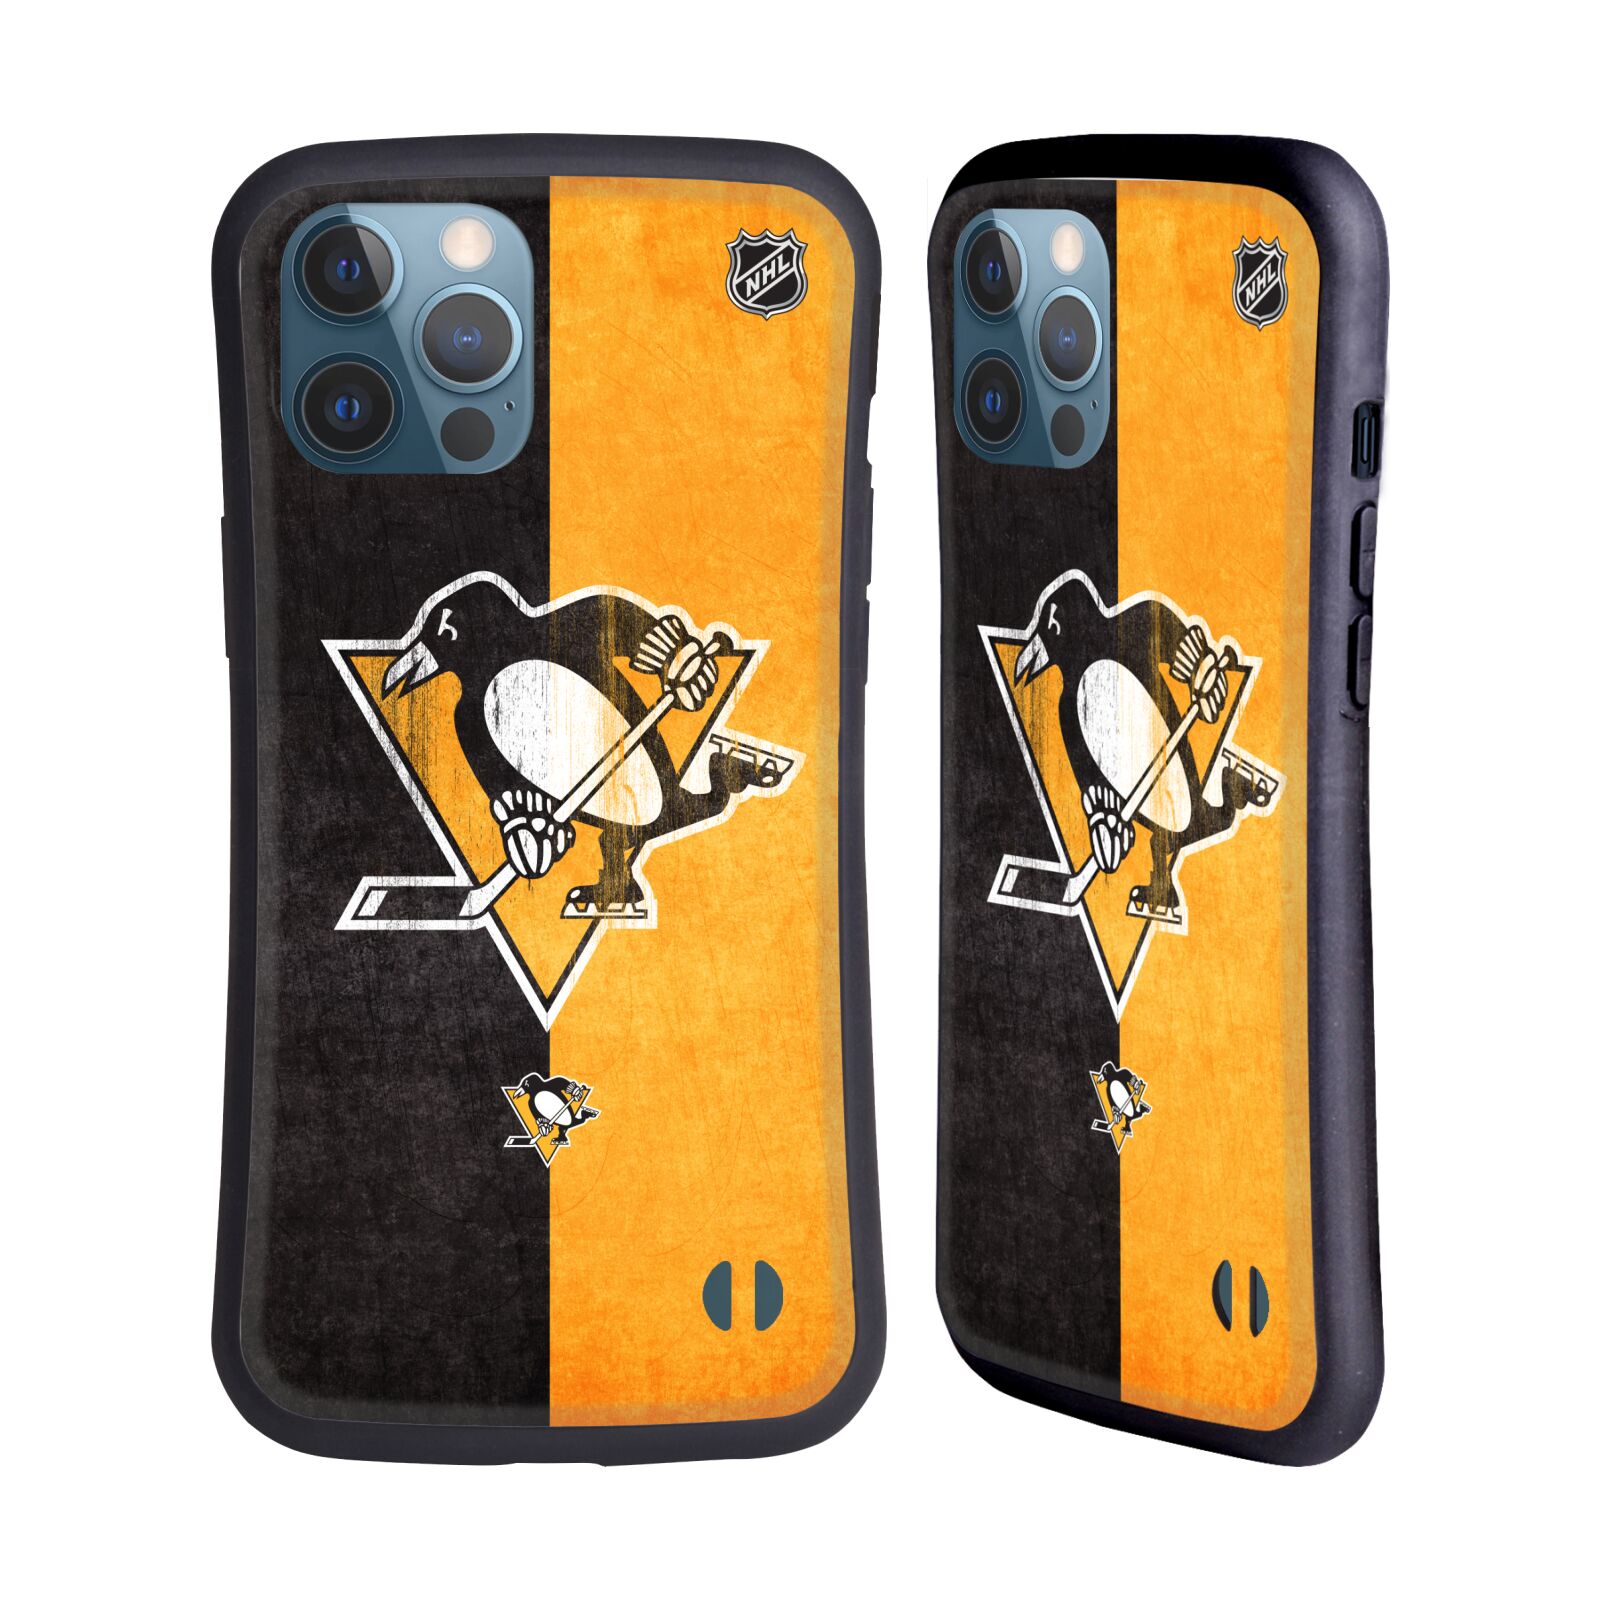 Obal na mobil Apple iPhone 12 PRO MAX - HEAD CASE - NHL - pruhy logo Pittsburgh Penguins